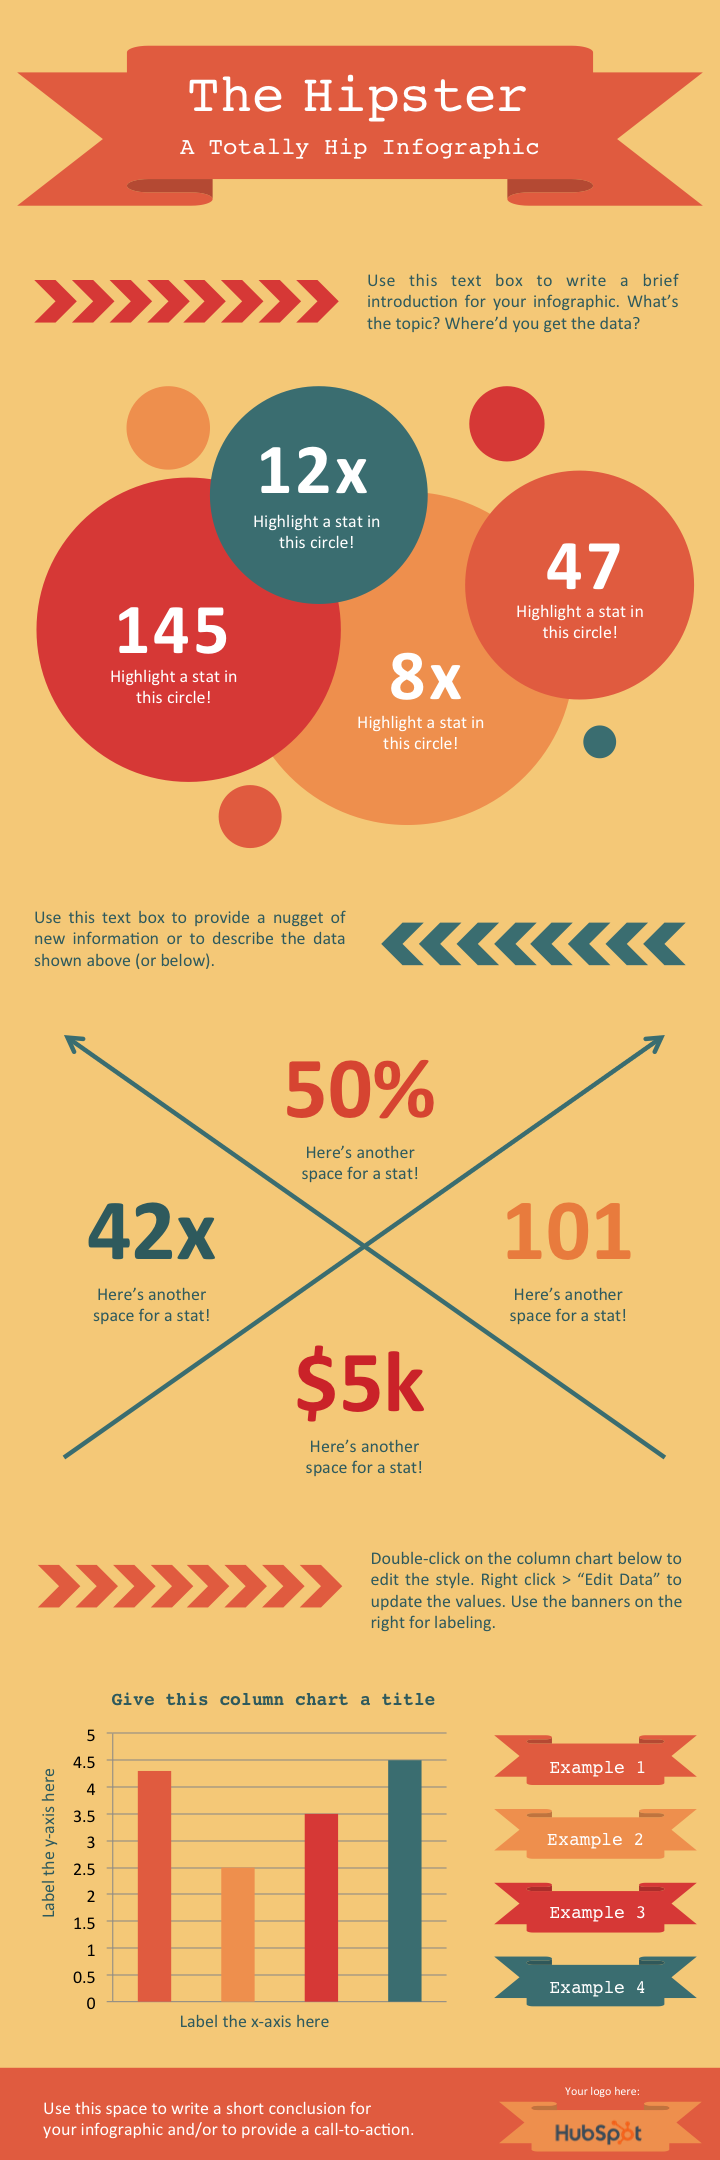 The Hipster infographic template